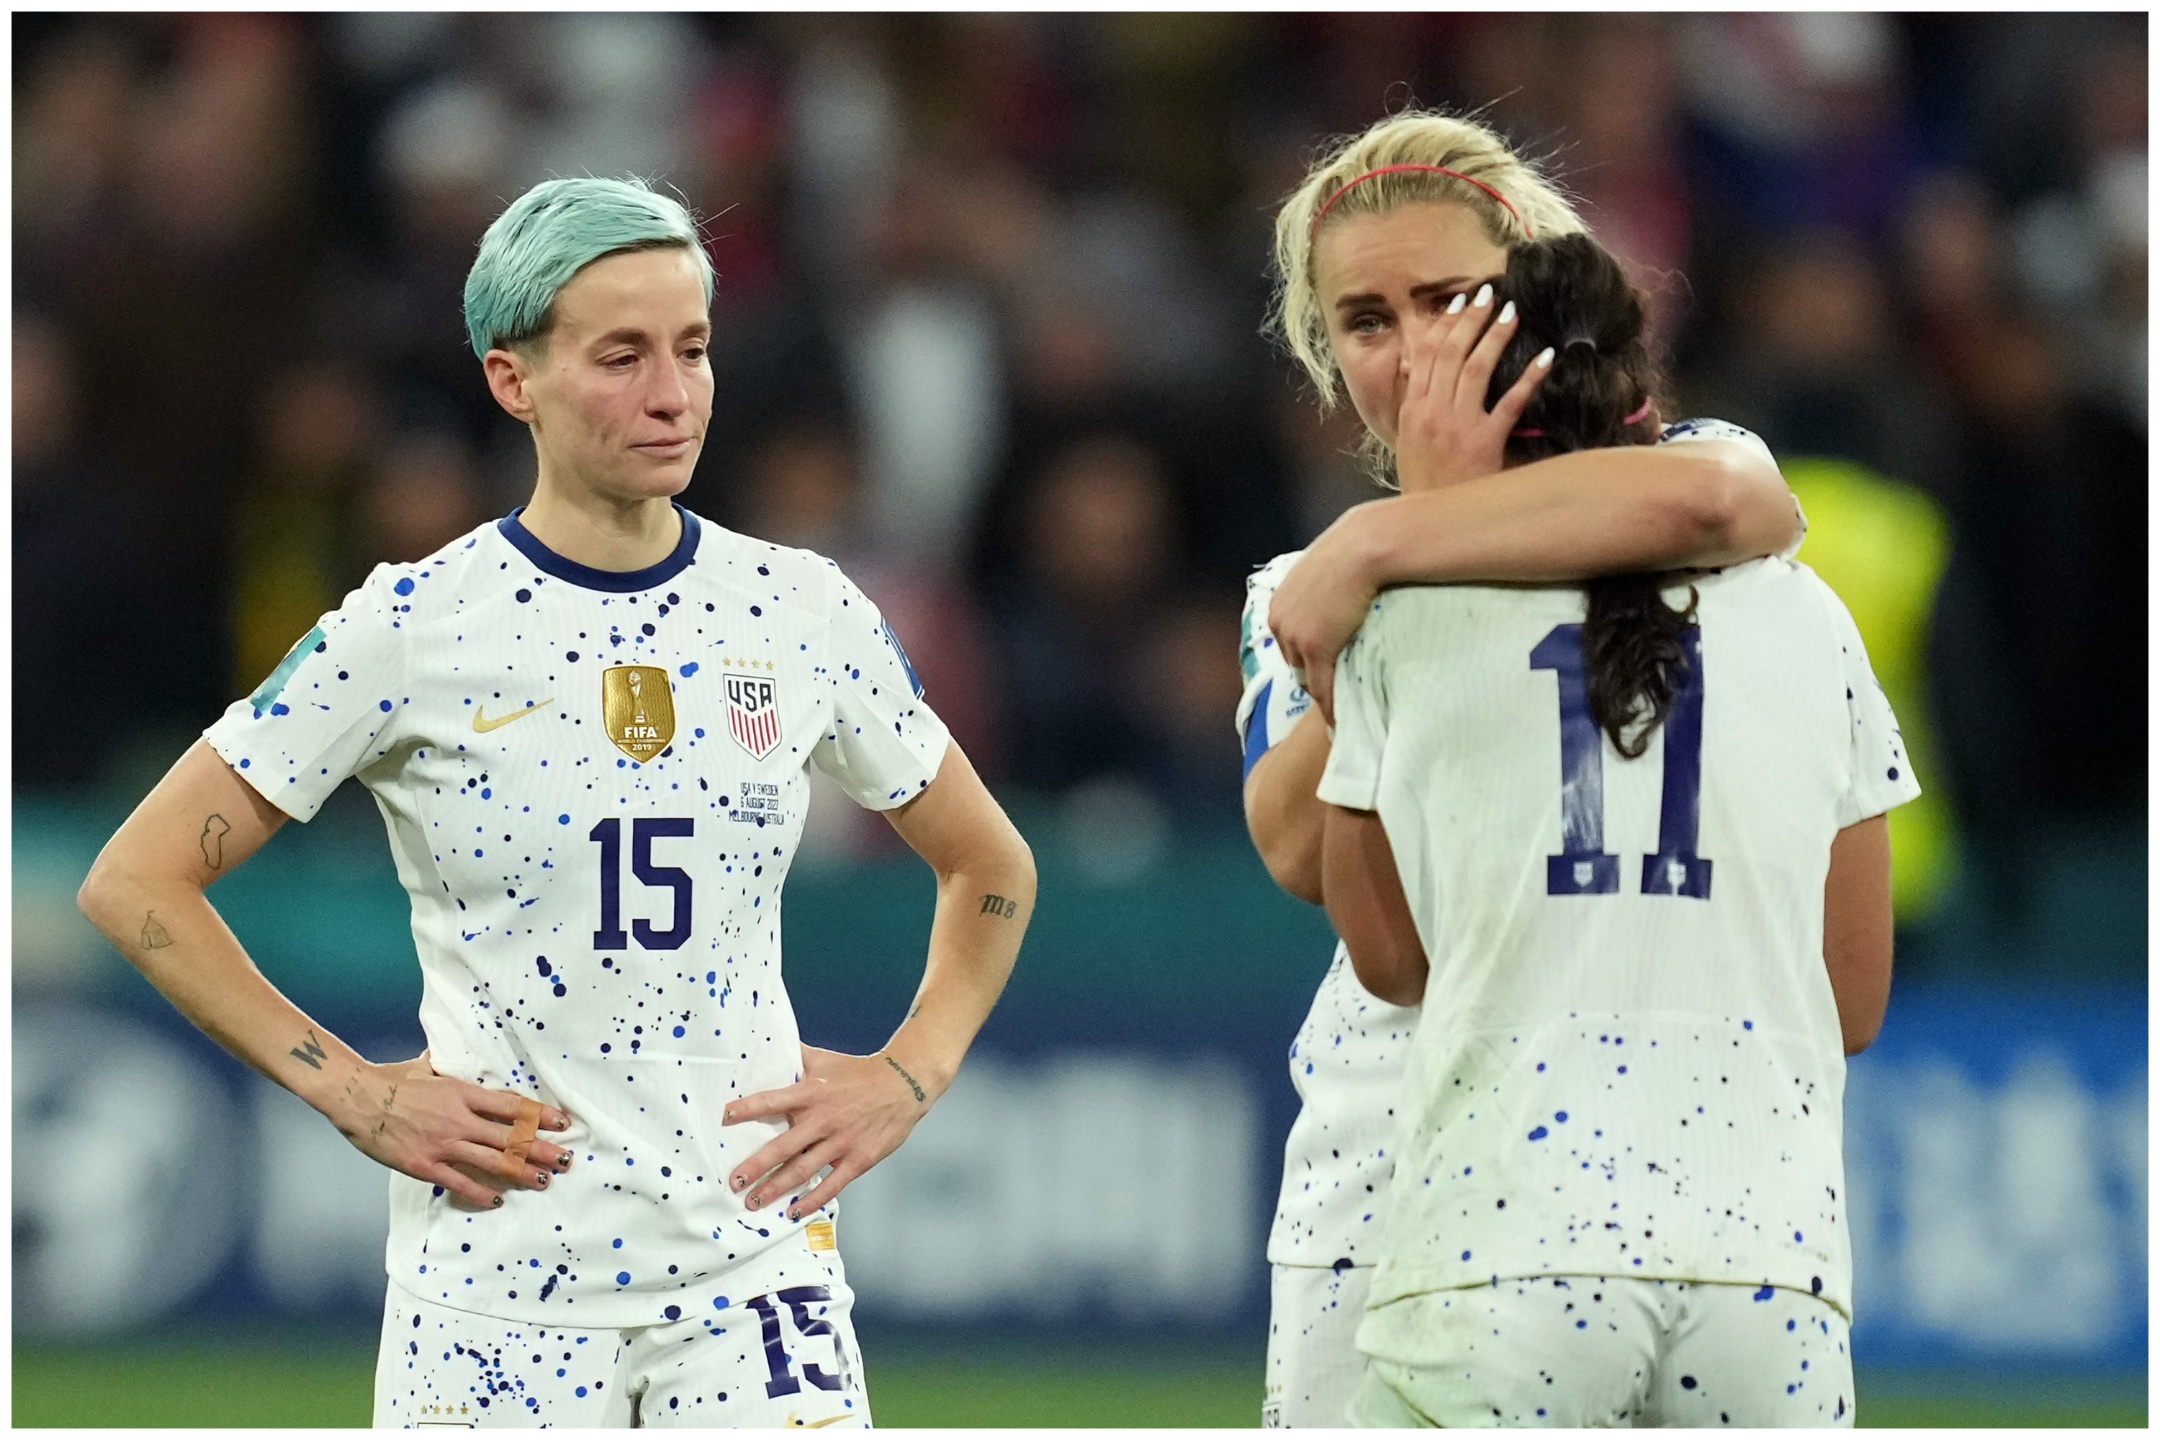 Sweden's Twitter lashes out at national women's soccer team - The